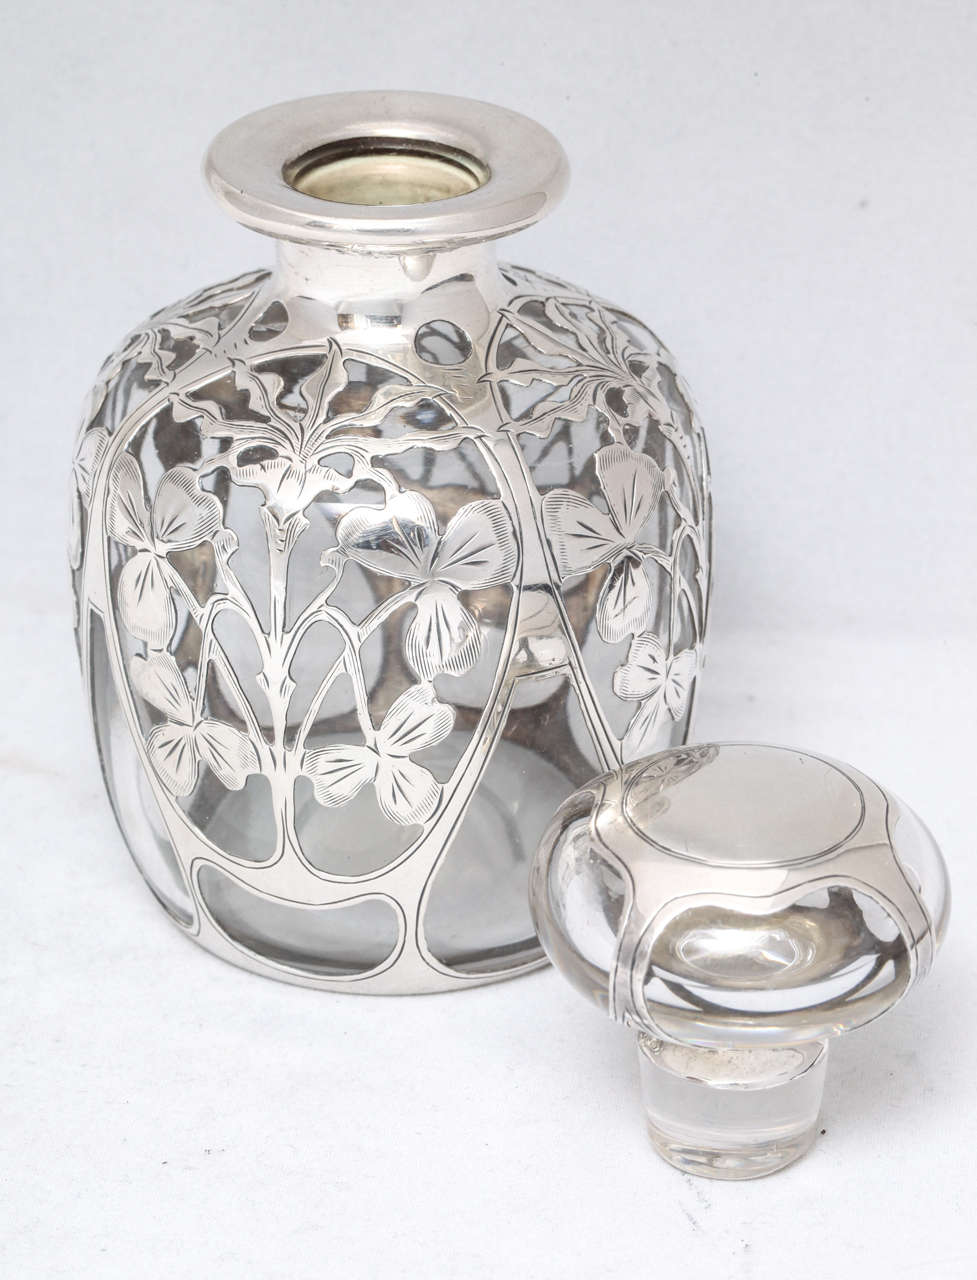 19th Century Art Nouveau Sterling Silver Overlay Perfume Bottle